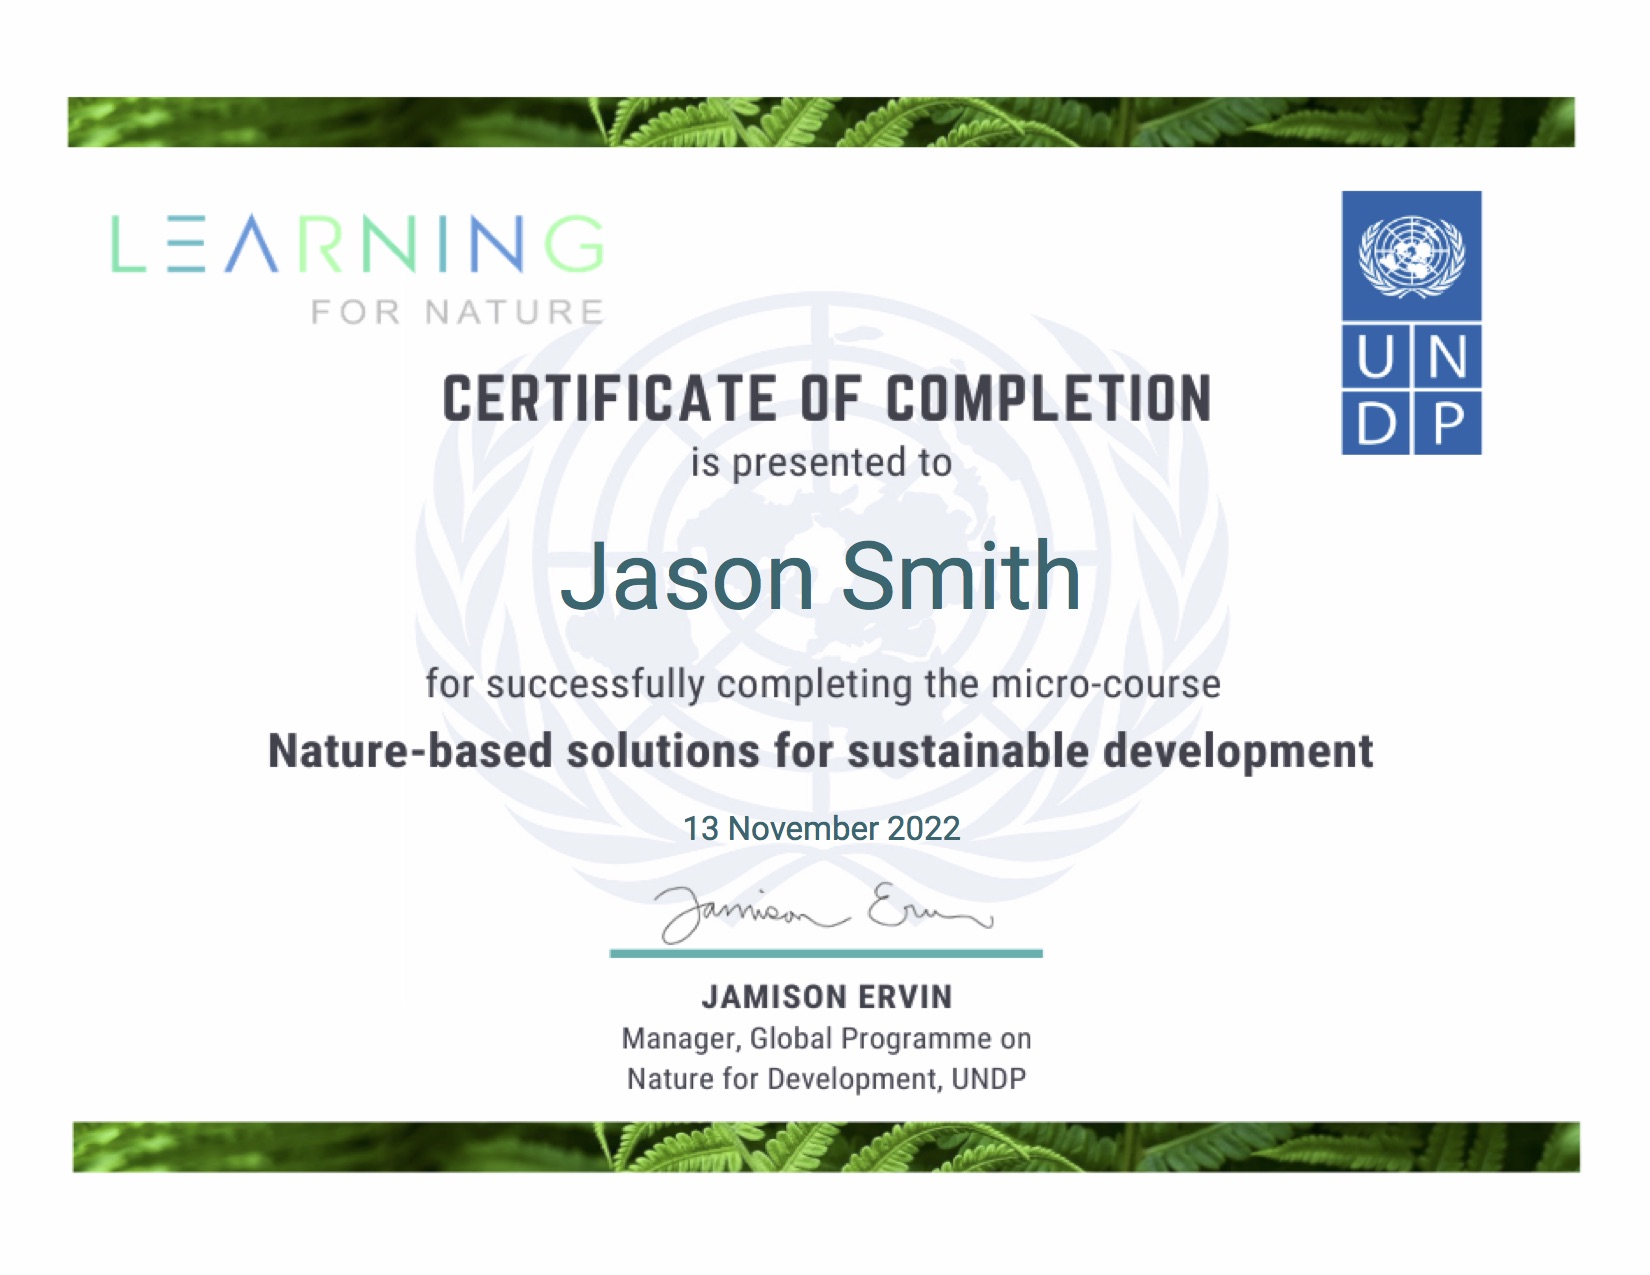 Jason-Smith-Nature-based-Solutions-for-Sustainable-Development-Nature-based-solutions-for-sustainable-development-Learning-for-Nature